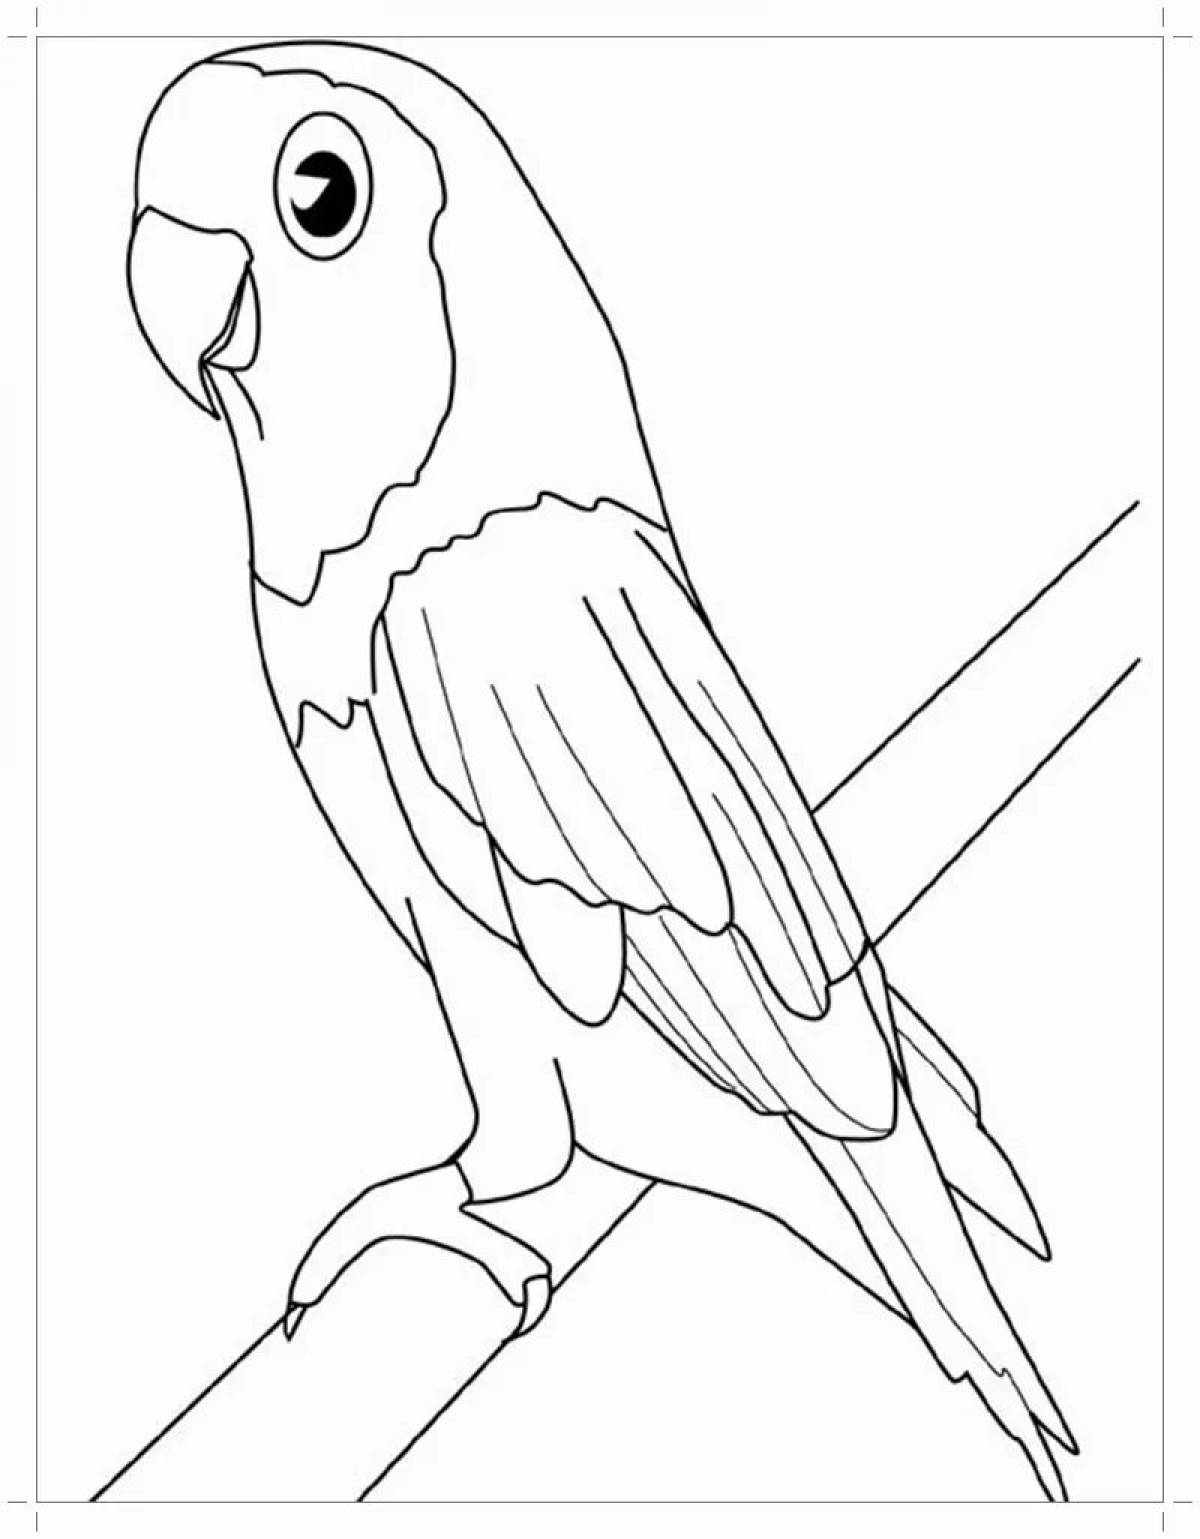 Color-explosion totyқұs coloring page